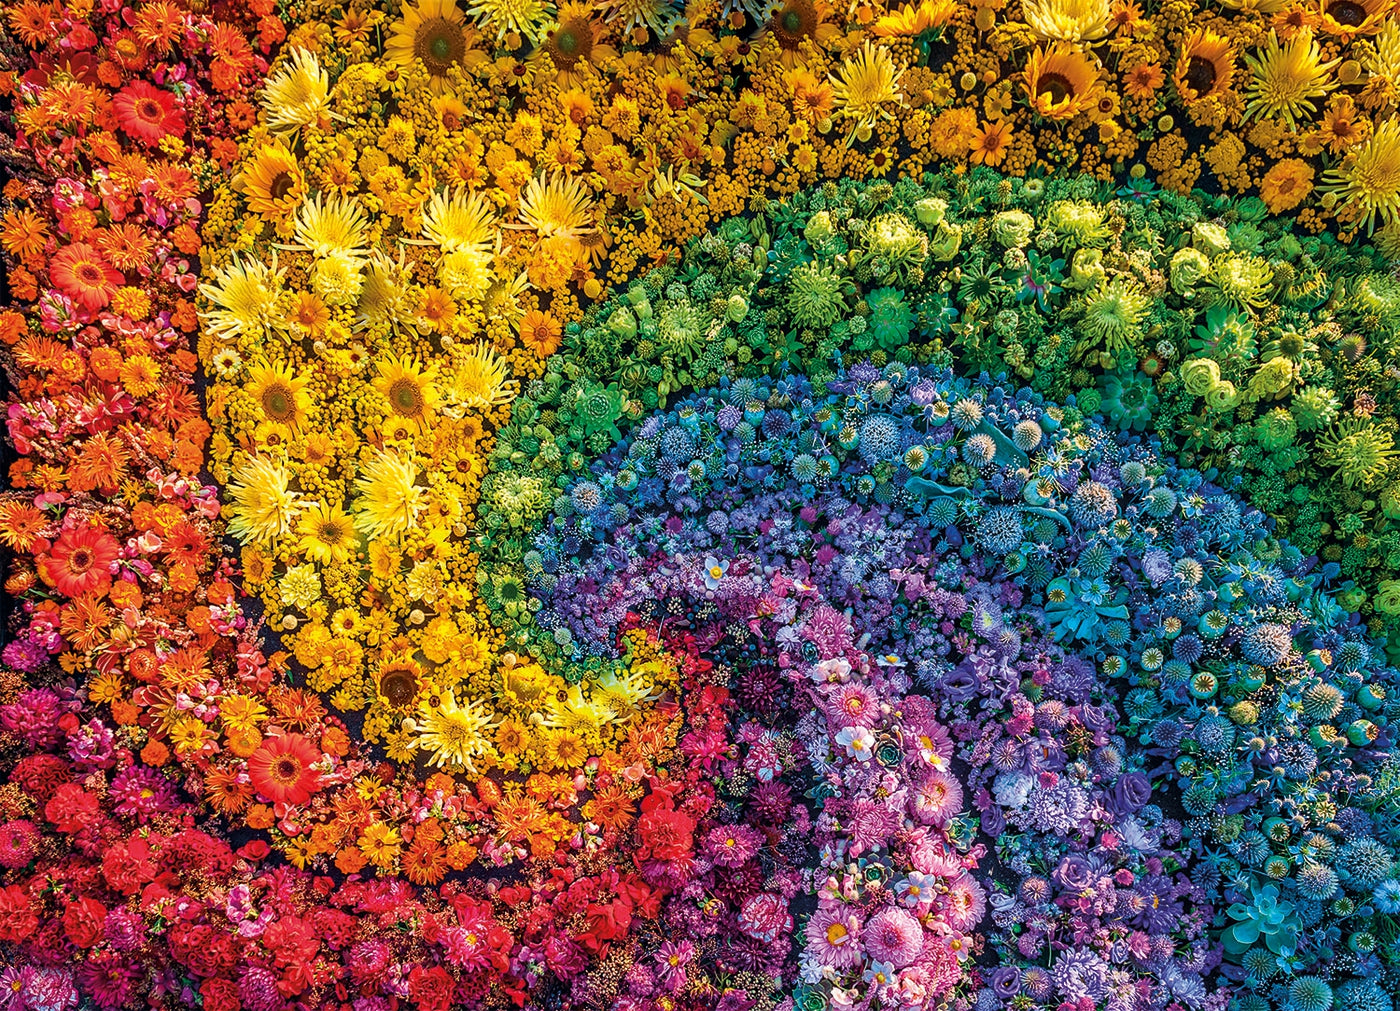 Whirl - 1000 pcs - ColorBoom